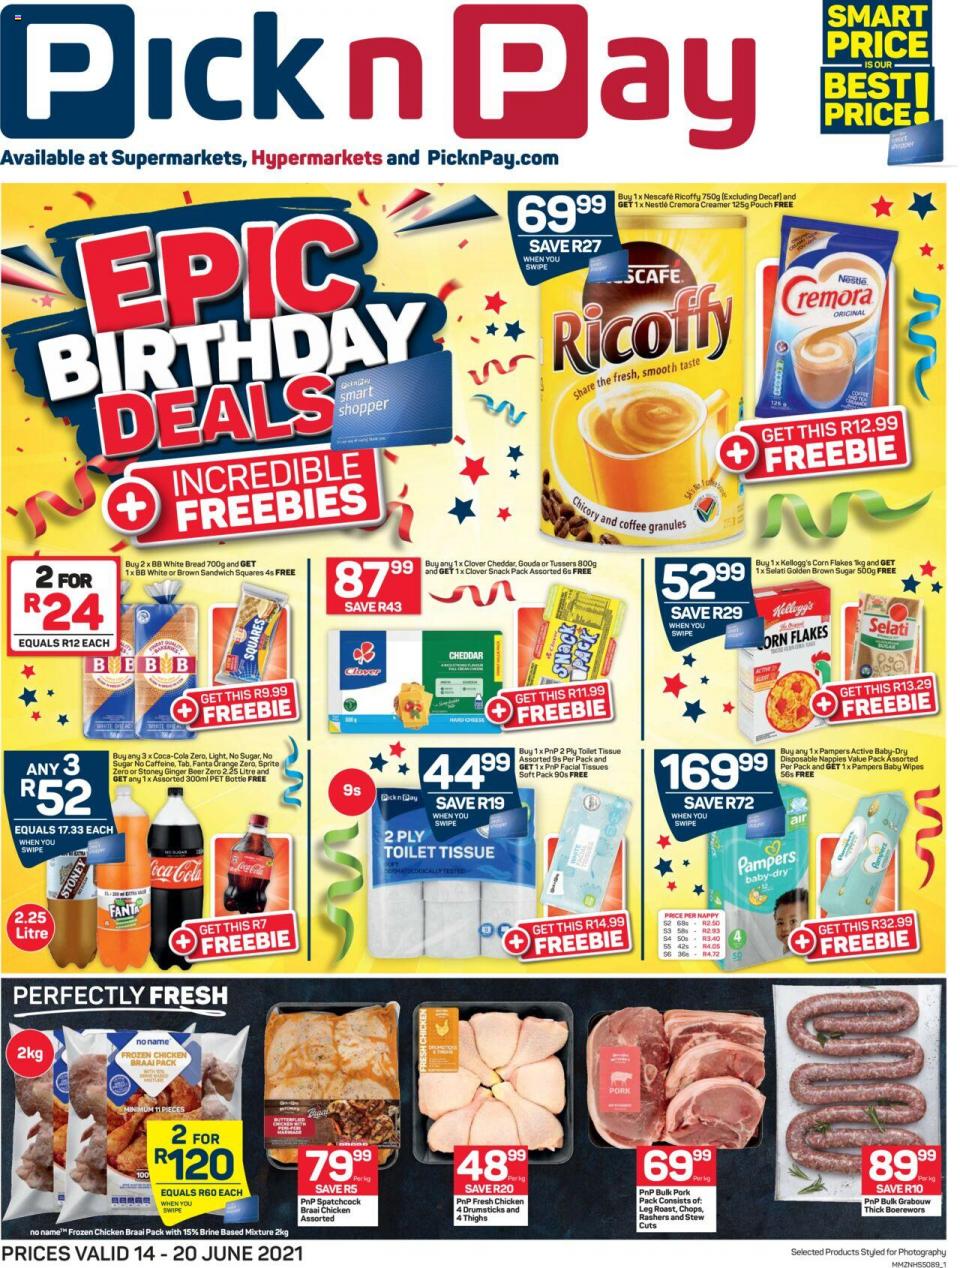 Pick n Pay Specials 14 – 20 June 2021